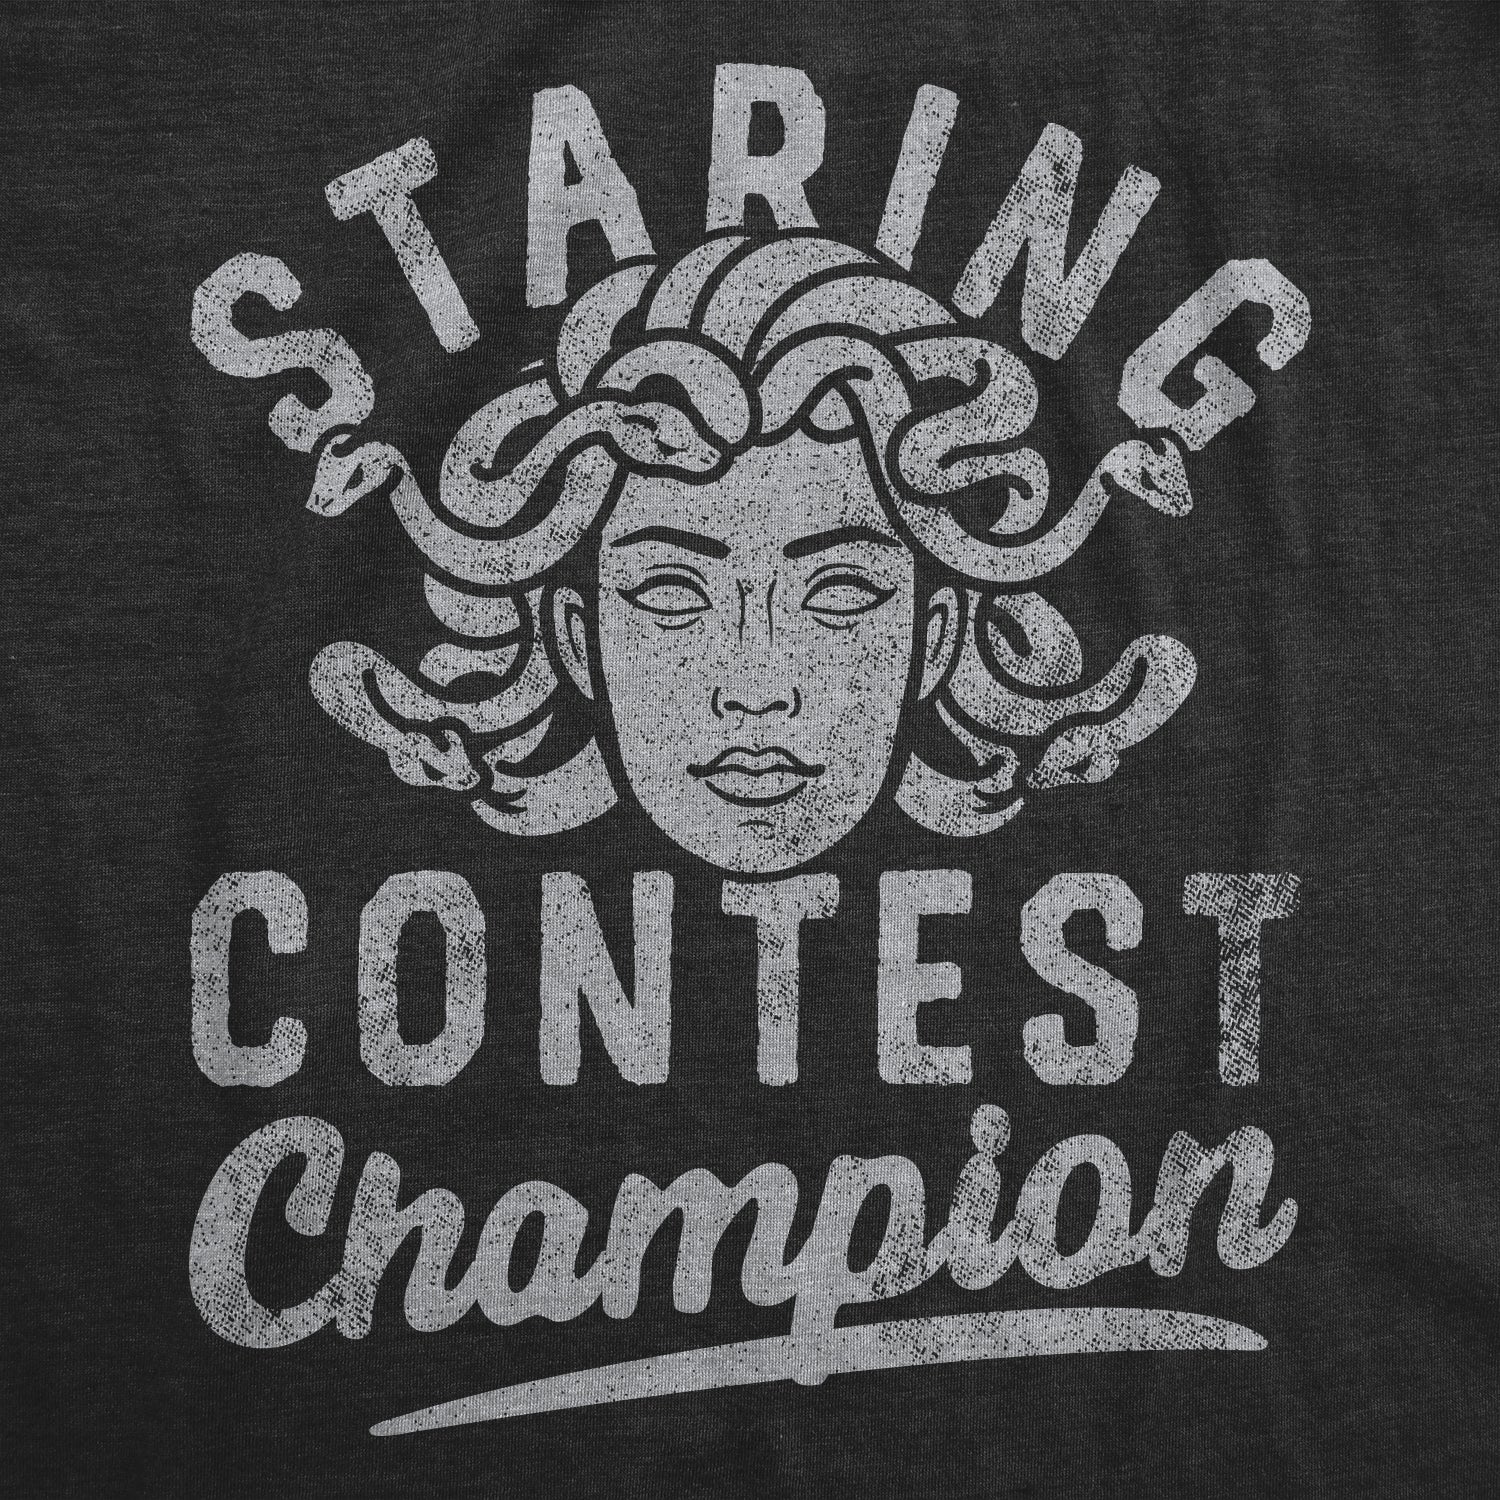 Funny Heather Black - STARING Staring Contest Champion Womens T Shirt Nerdy Sarcastic Tee